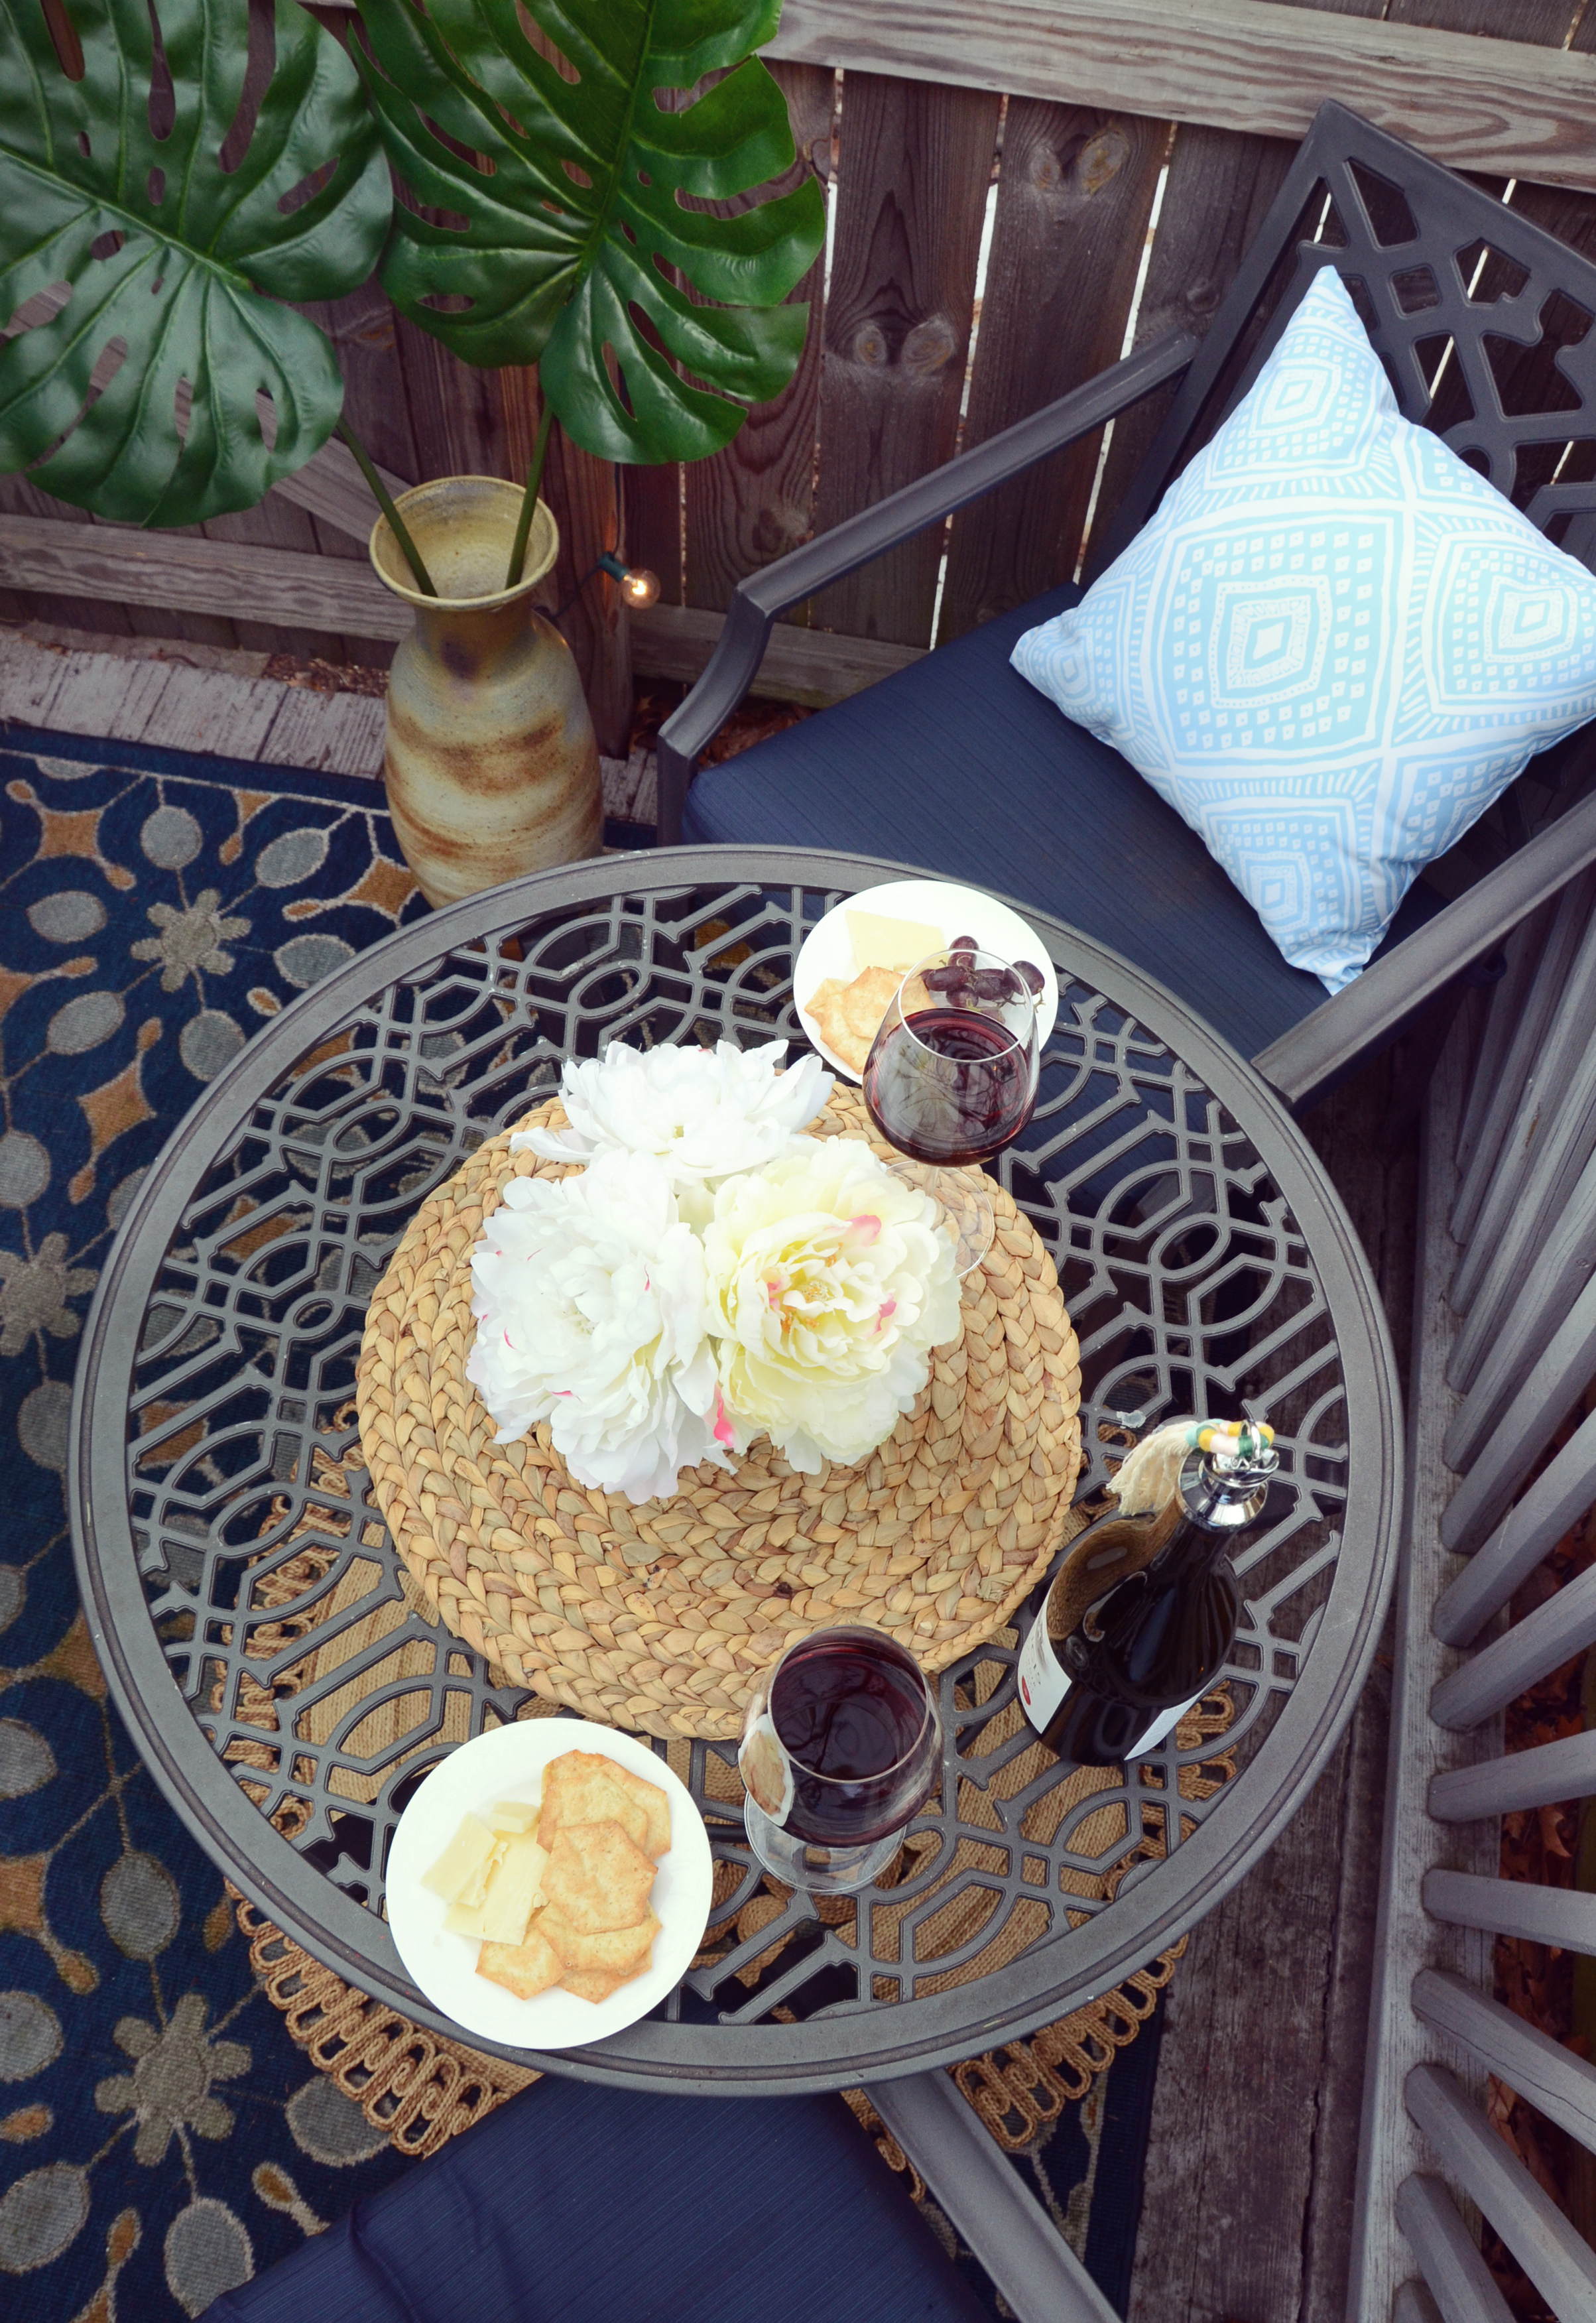 My Favorite Patio Date Night Ideas /// By Faith Towers Provencher of Design Fixation